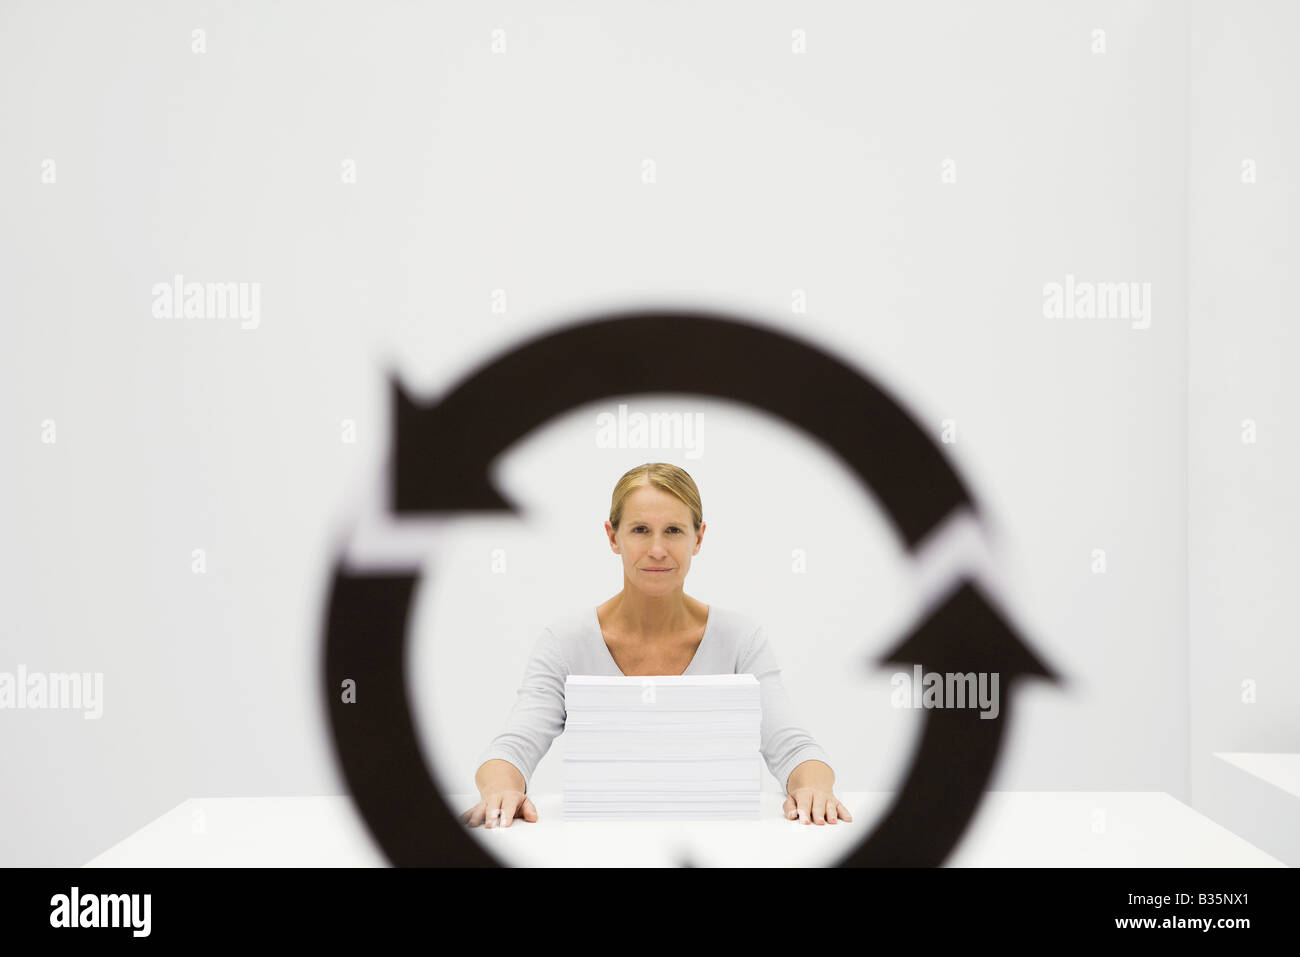 Professional woman sitting behind stack of paper, looking at camera through recycling symbol Stock Photo